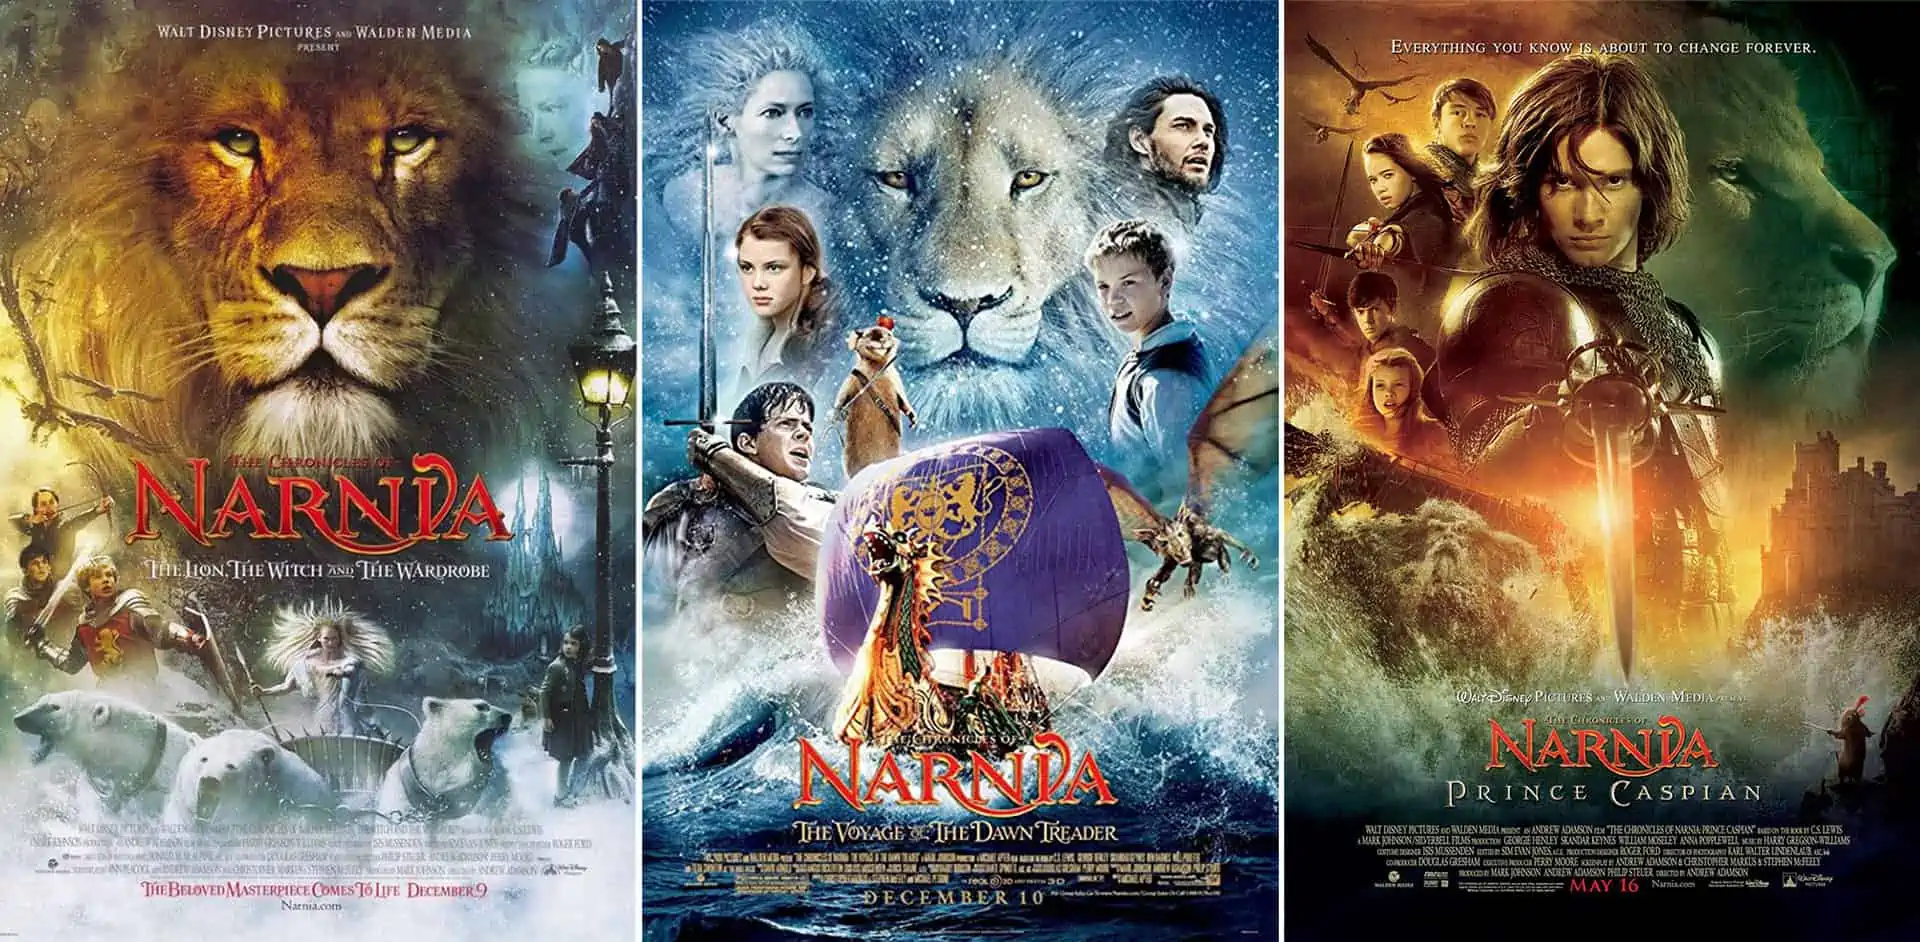 Watch “The Chronicles of Narnia” Movies in Order